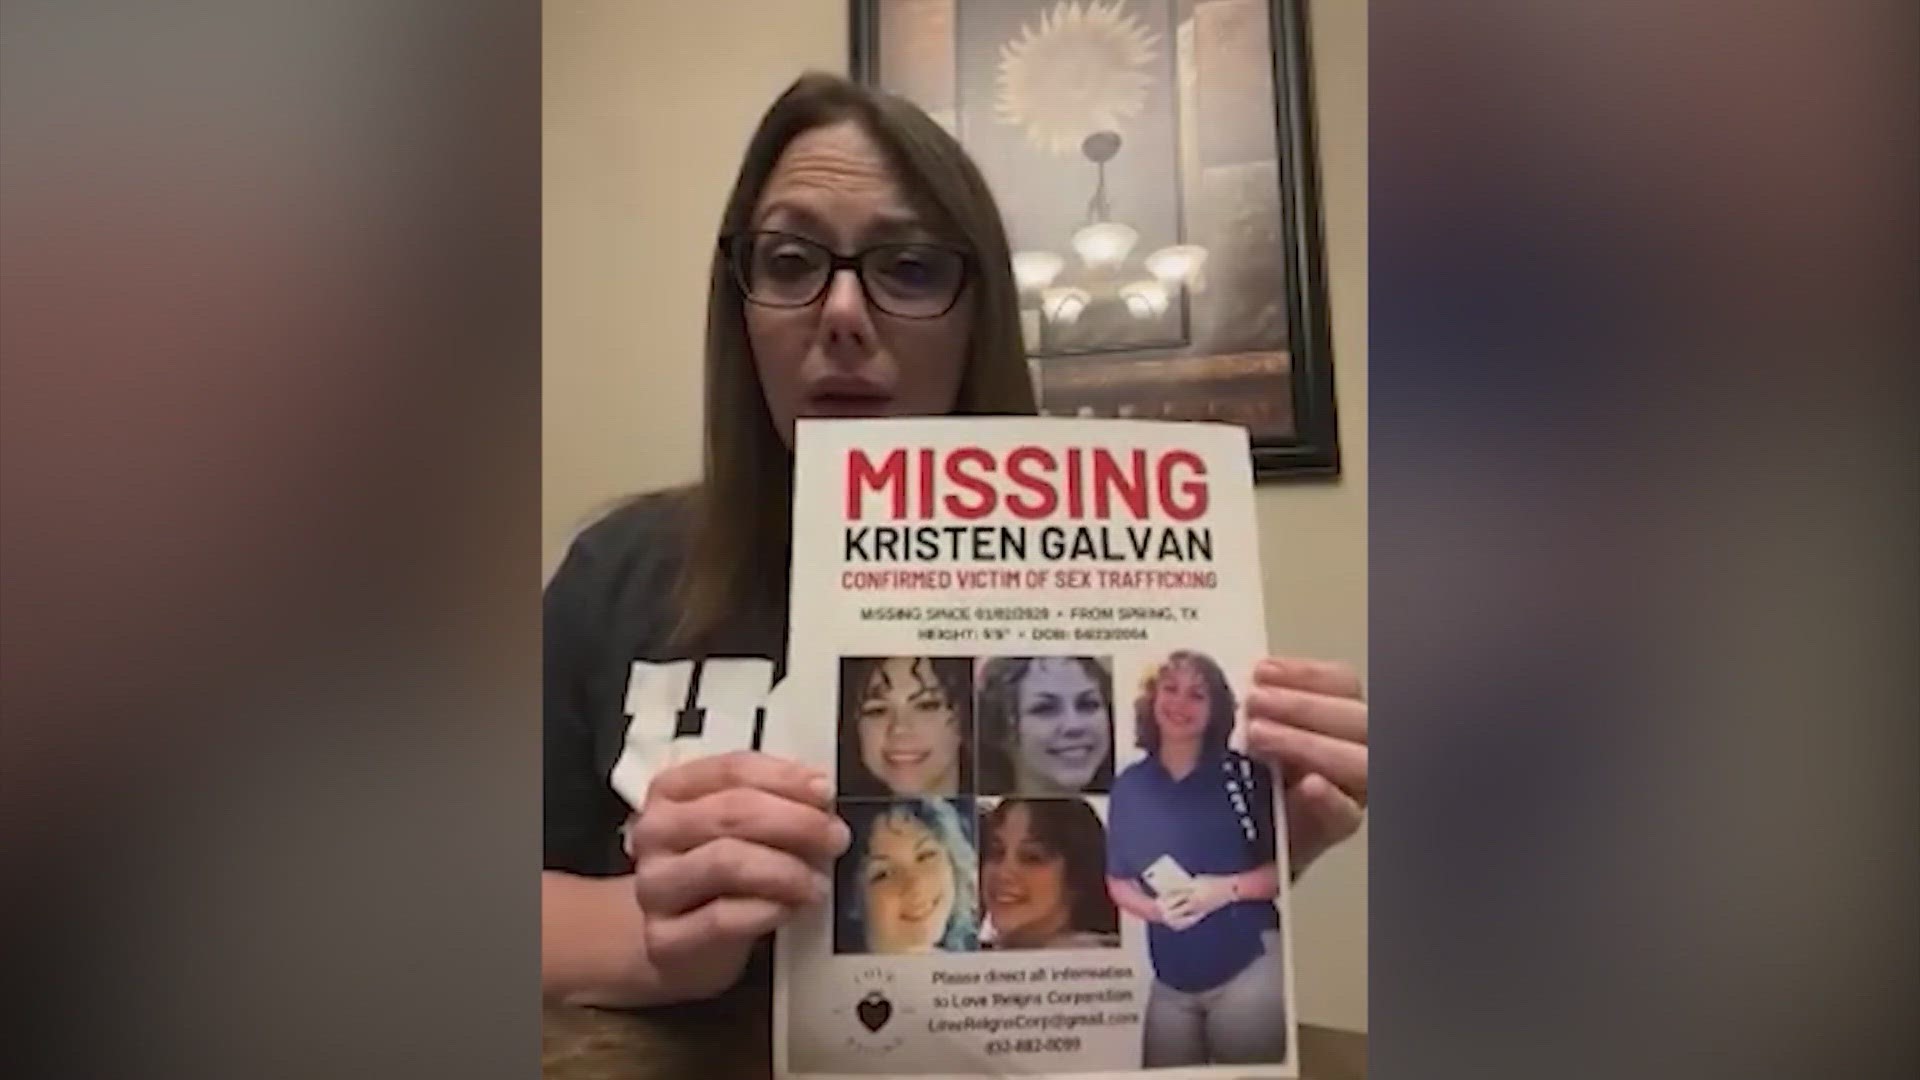 The 15-year-old had previously been trafficked in 2019 before her family got her back. Kristen went missing again two and a half weeks later and hasn't been found.